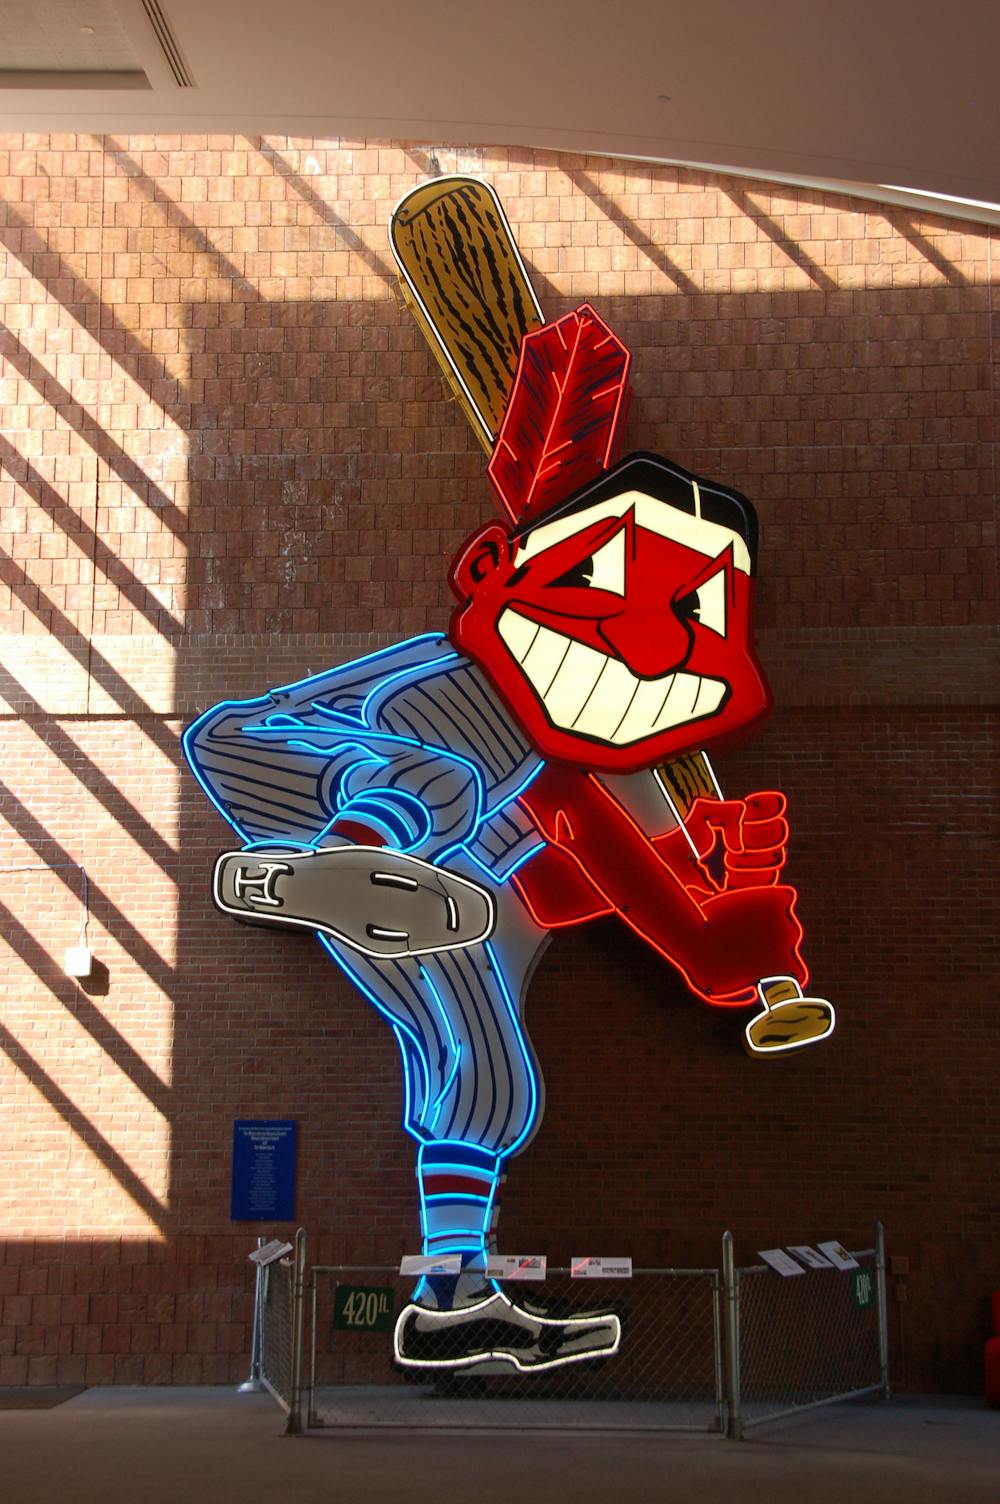 Cleveland Indians Chief Wahoo logo neon sign, the old mascot of